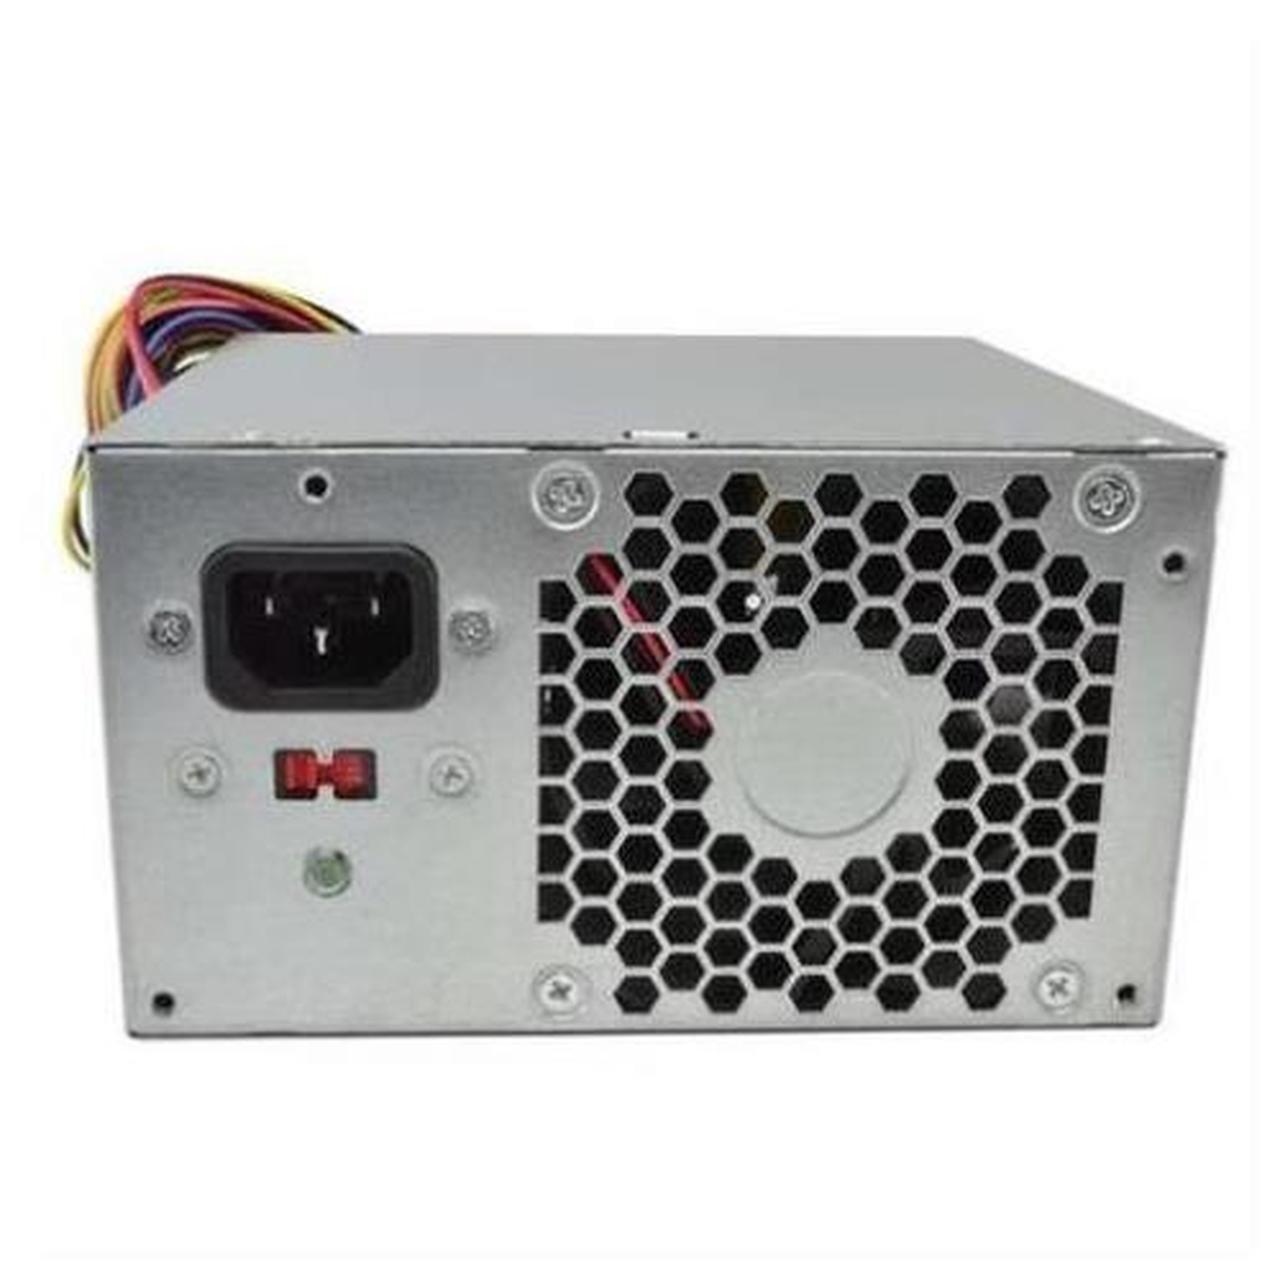 600W DS4700 Express Storage Subsystem AC Power Supply/Fan Unit Image